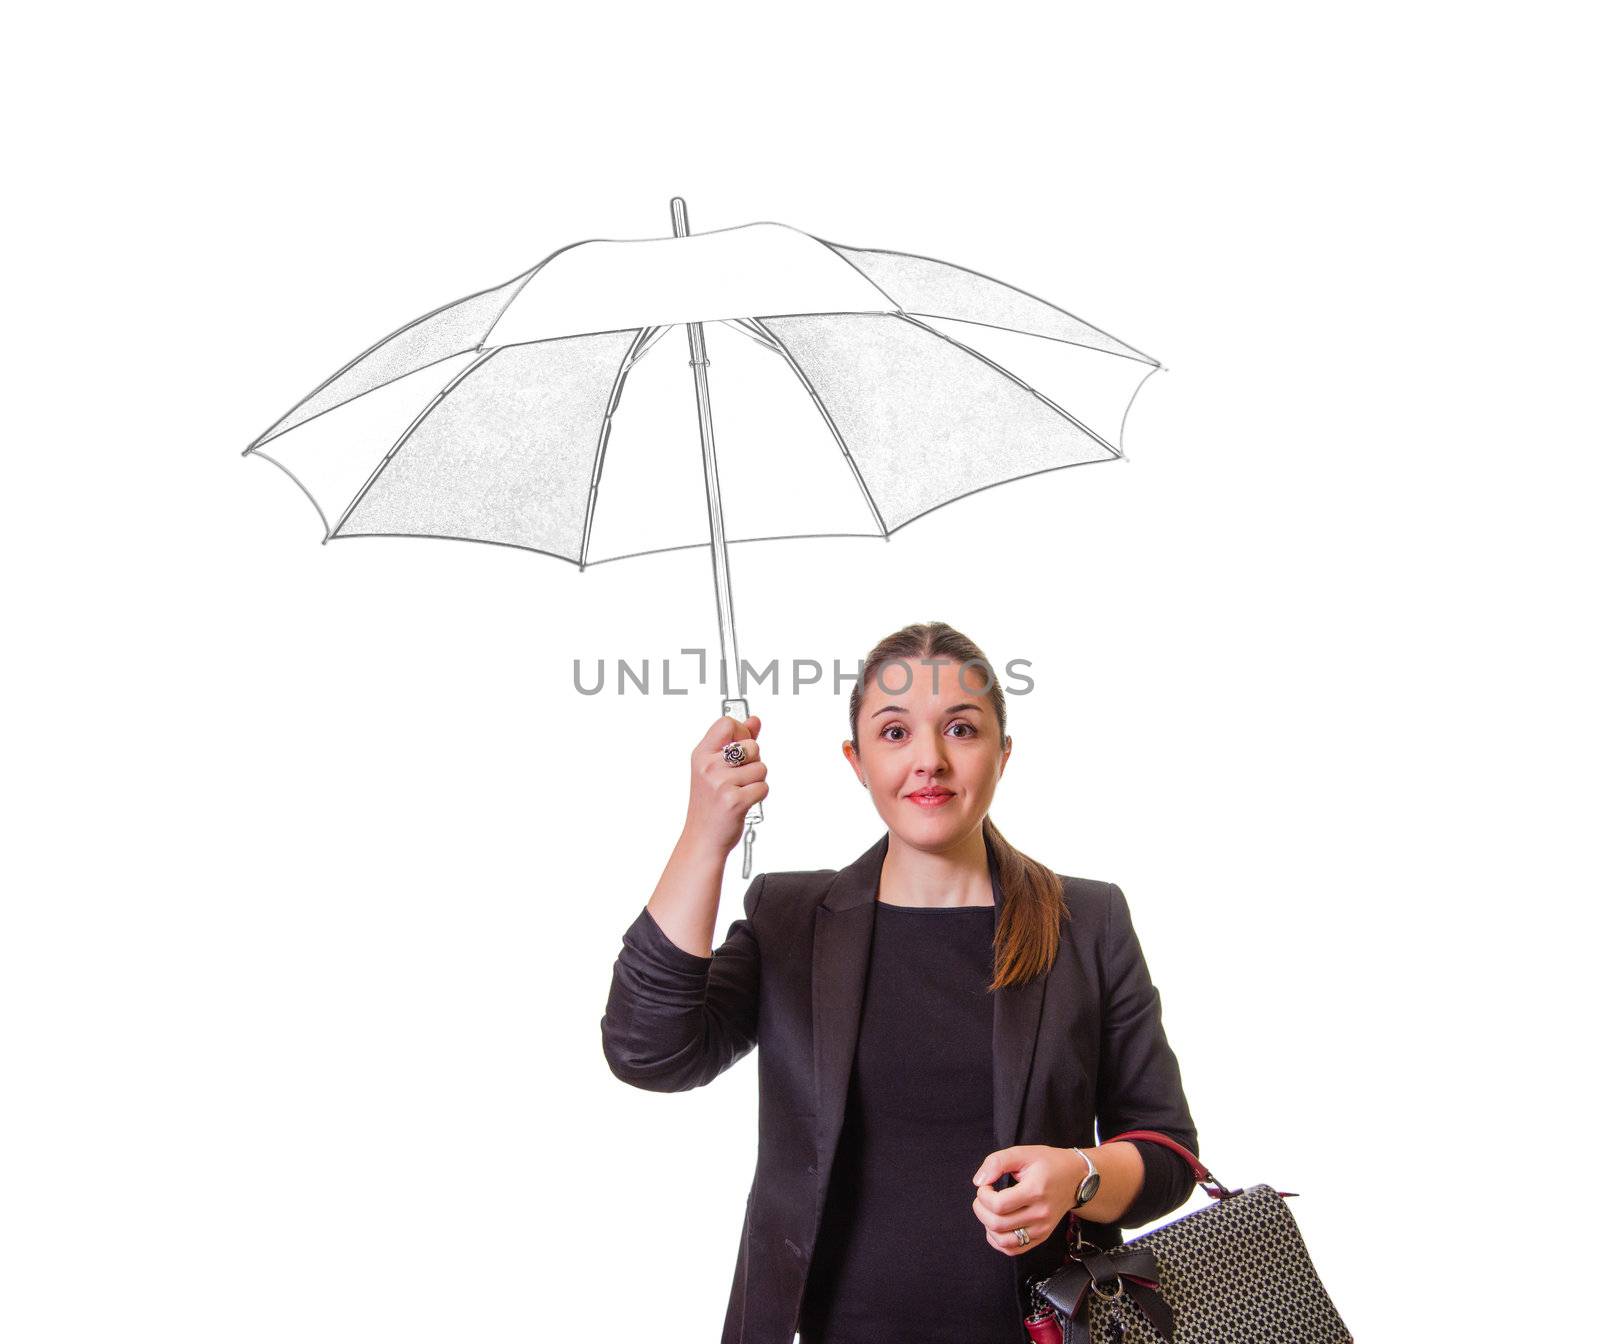 Pretty girl with drawing umbrella isolated on white background by doble.d